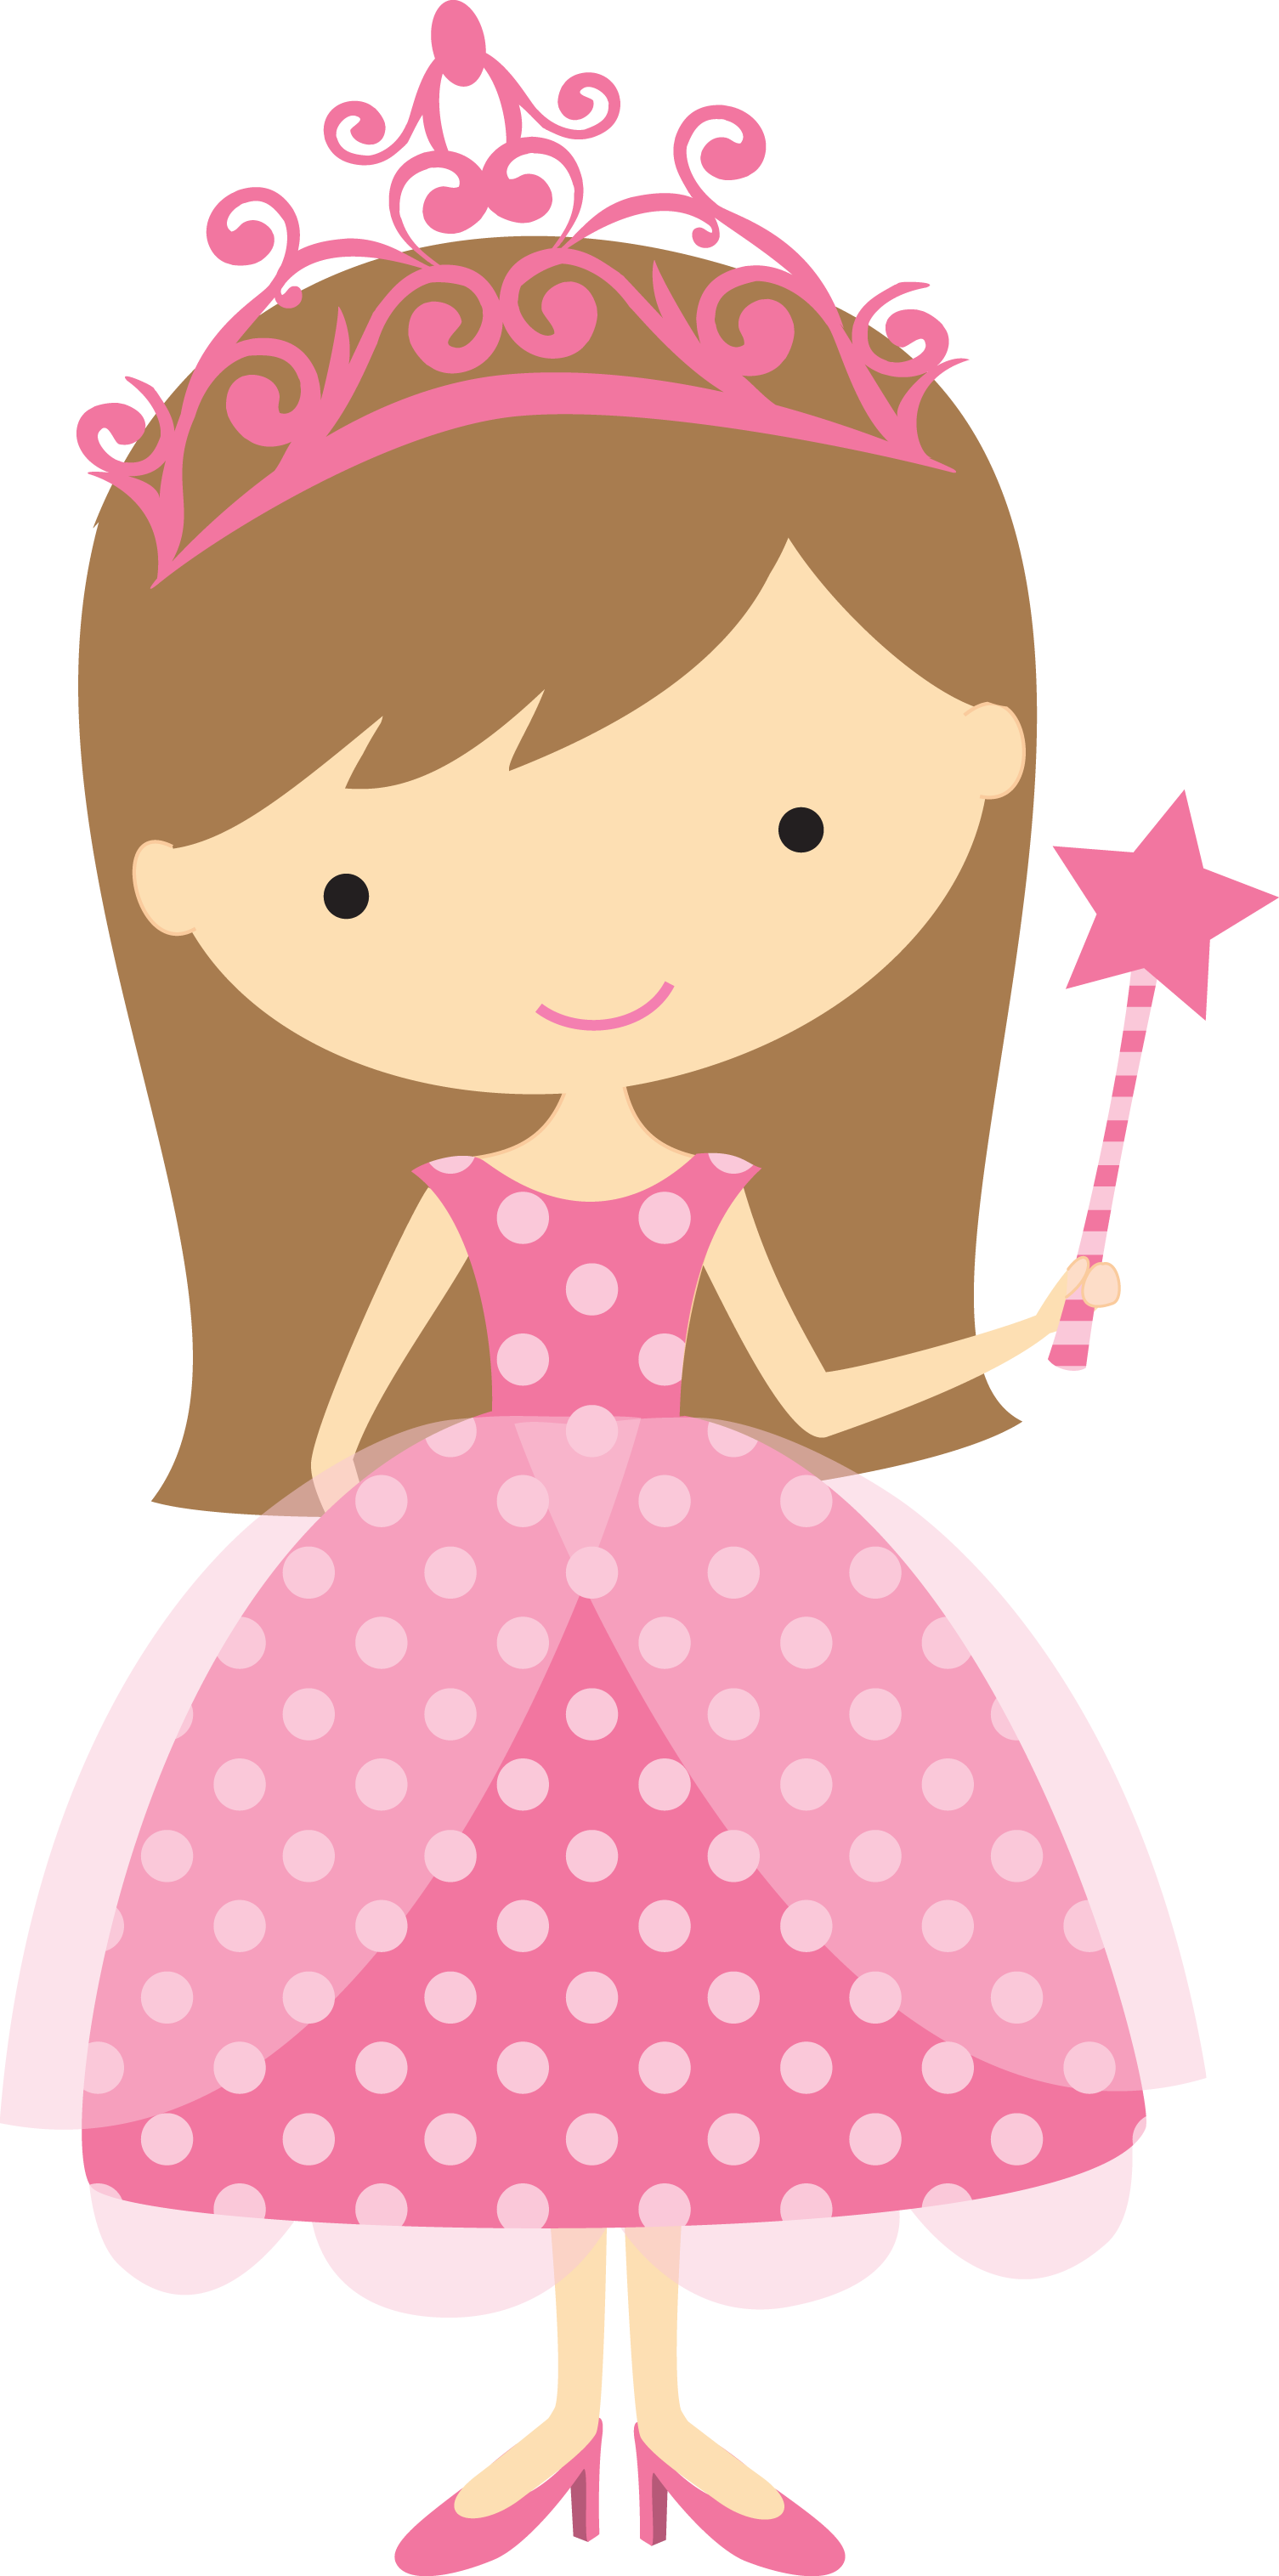 Free Little Princess Cliparts, Download Free Clip Art, Free